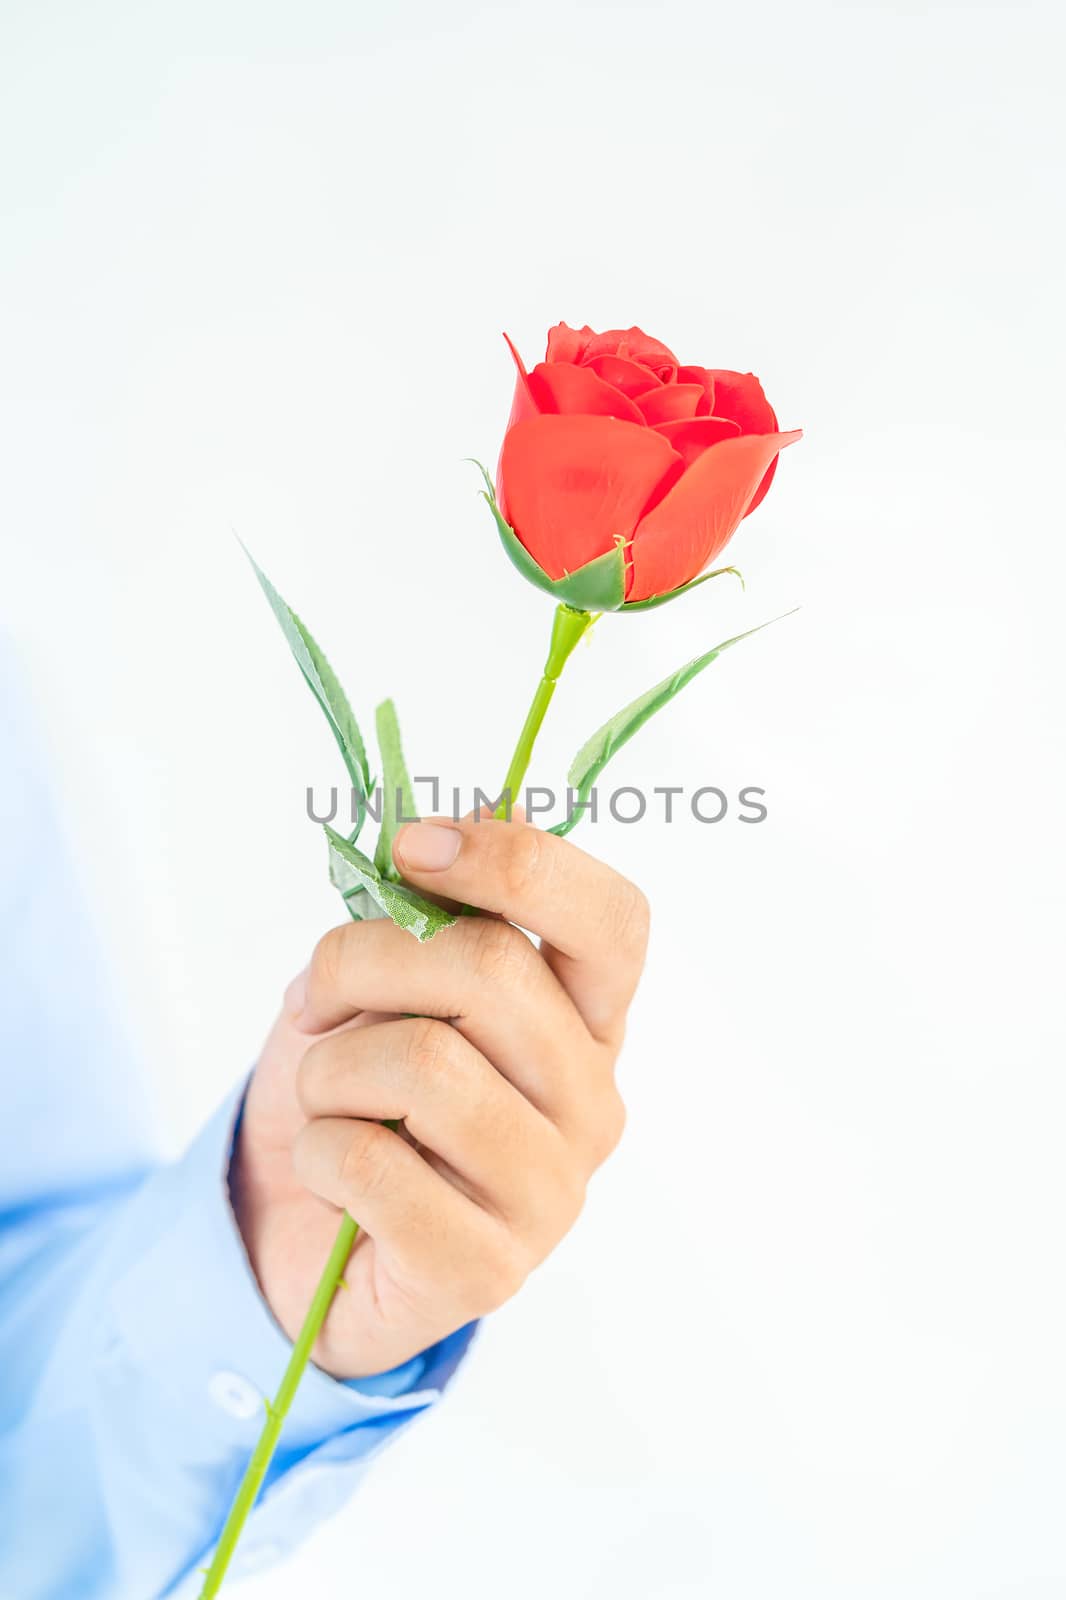 Close up photo of Man holding red roses in hand on white background